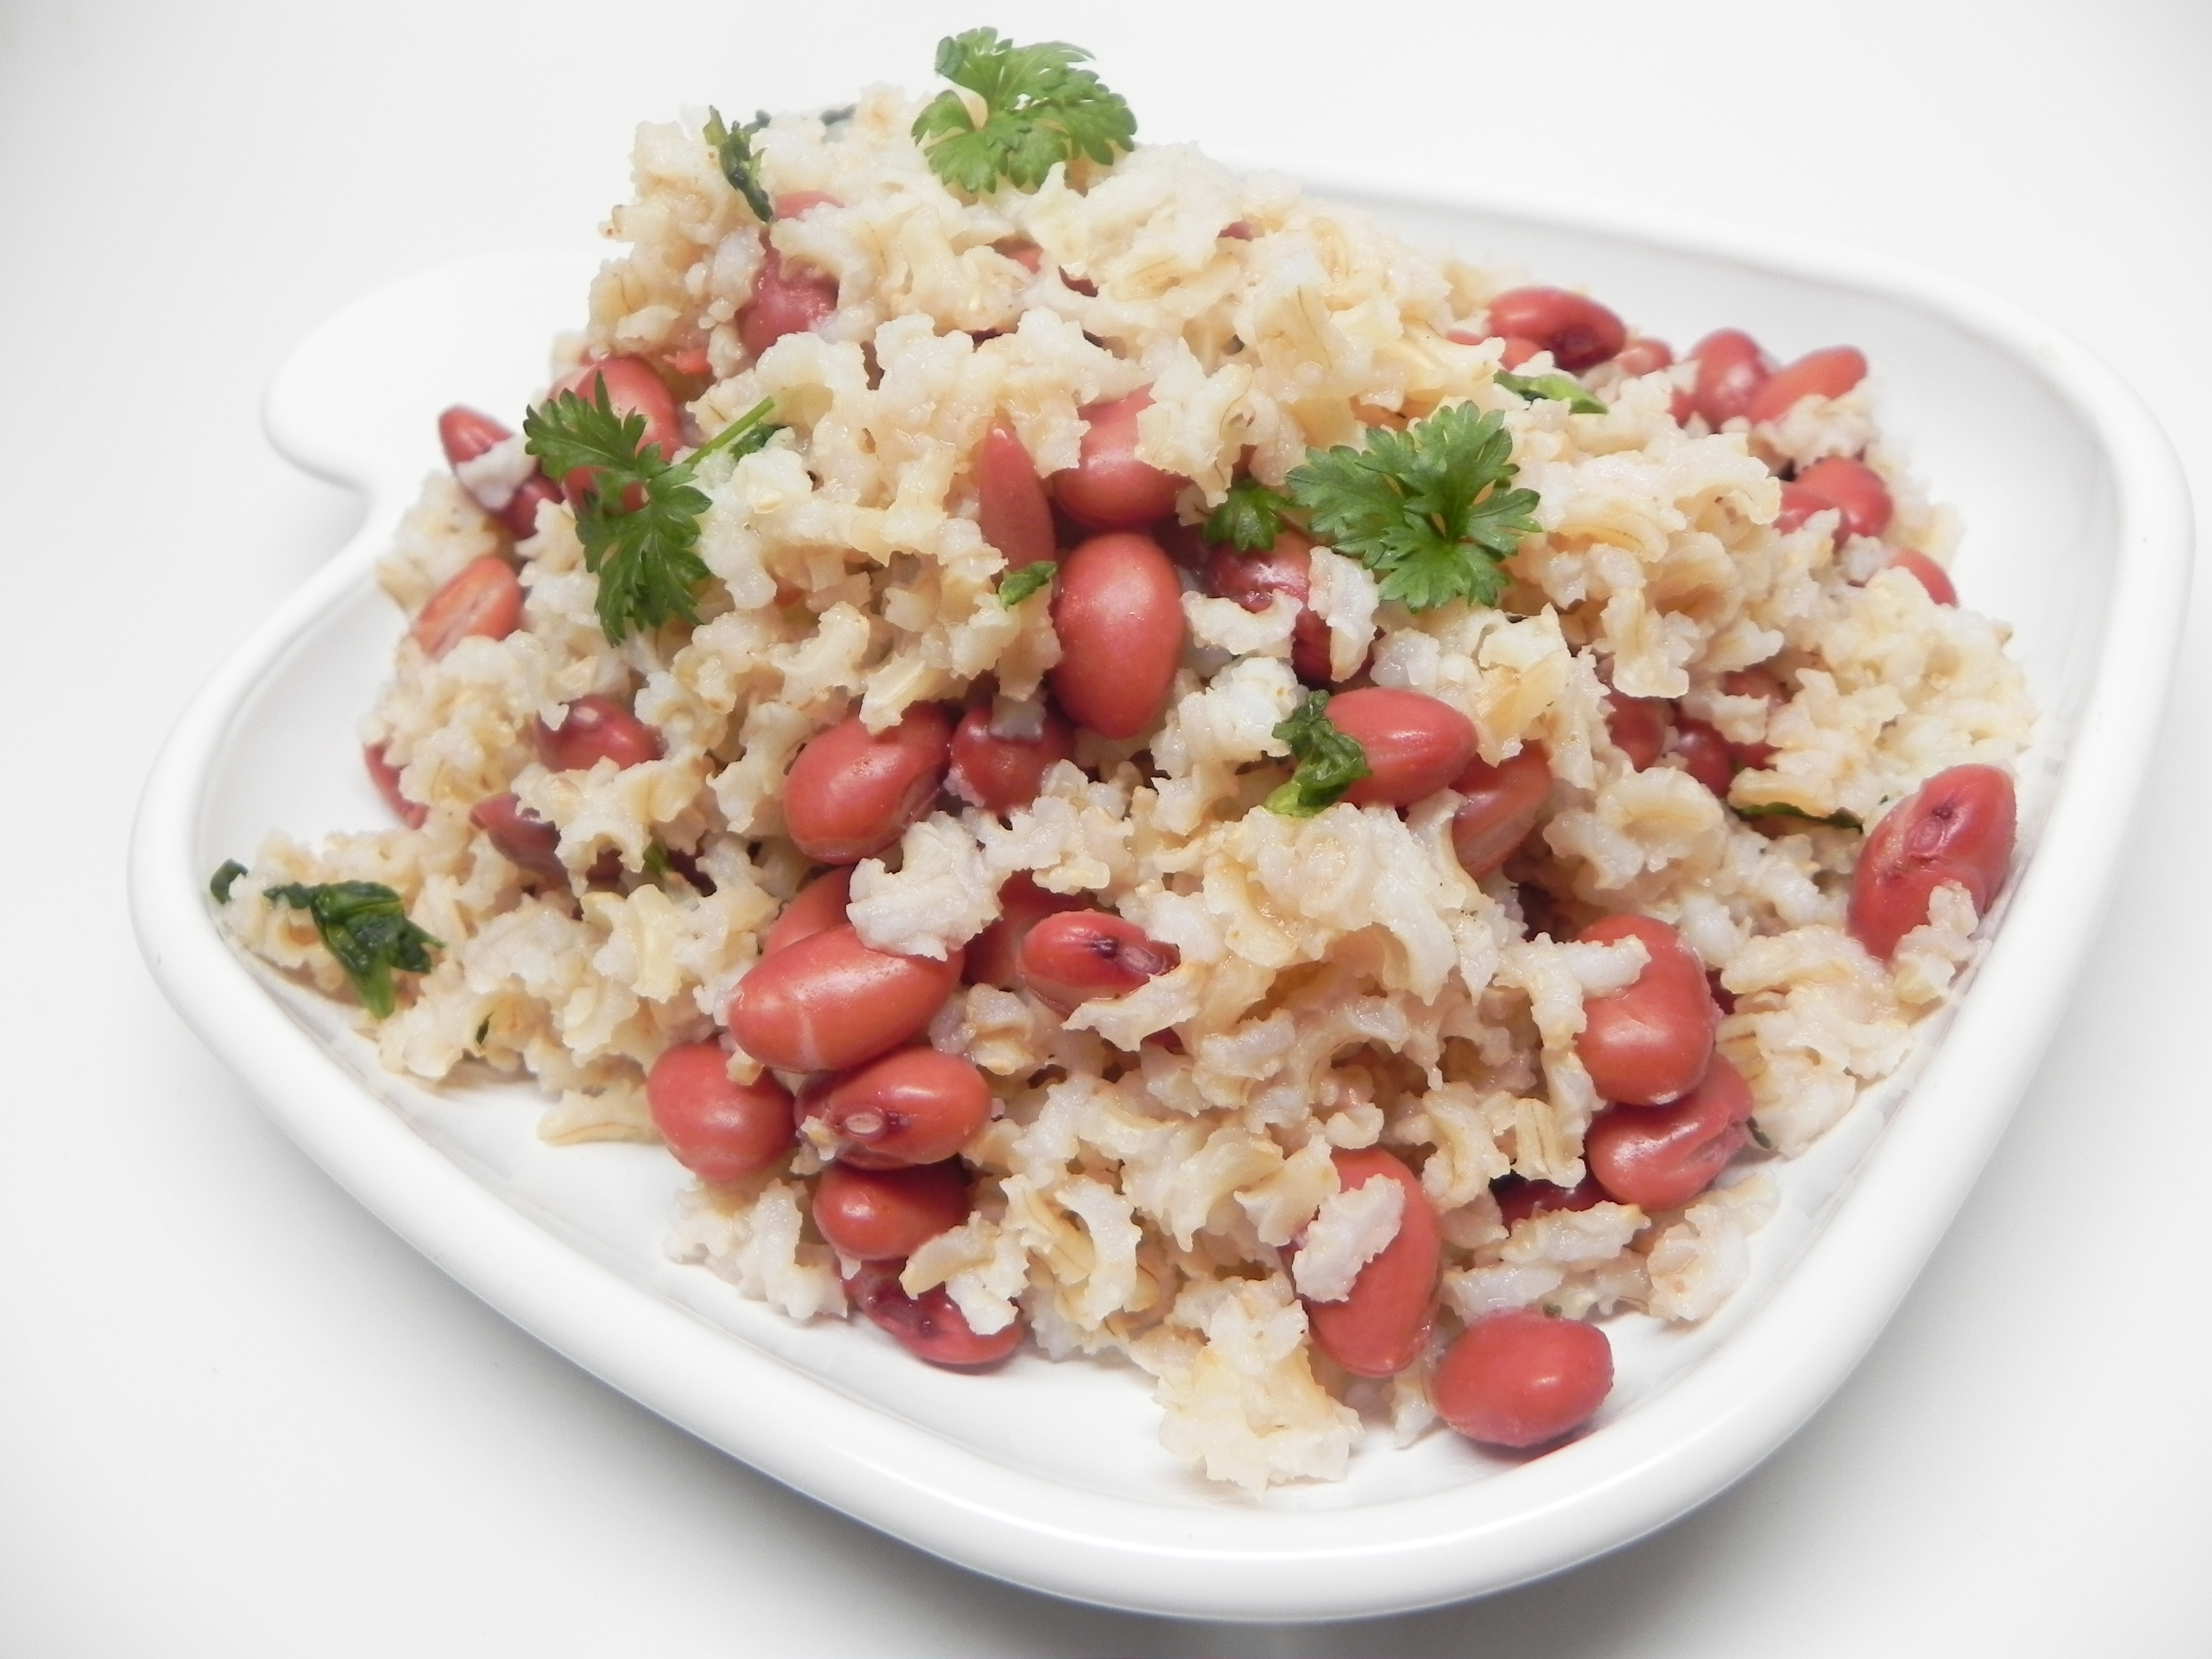 Cajun Meatless Red Beans and Brown Rice